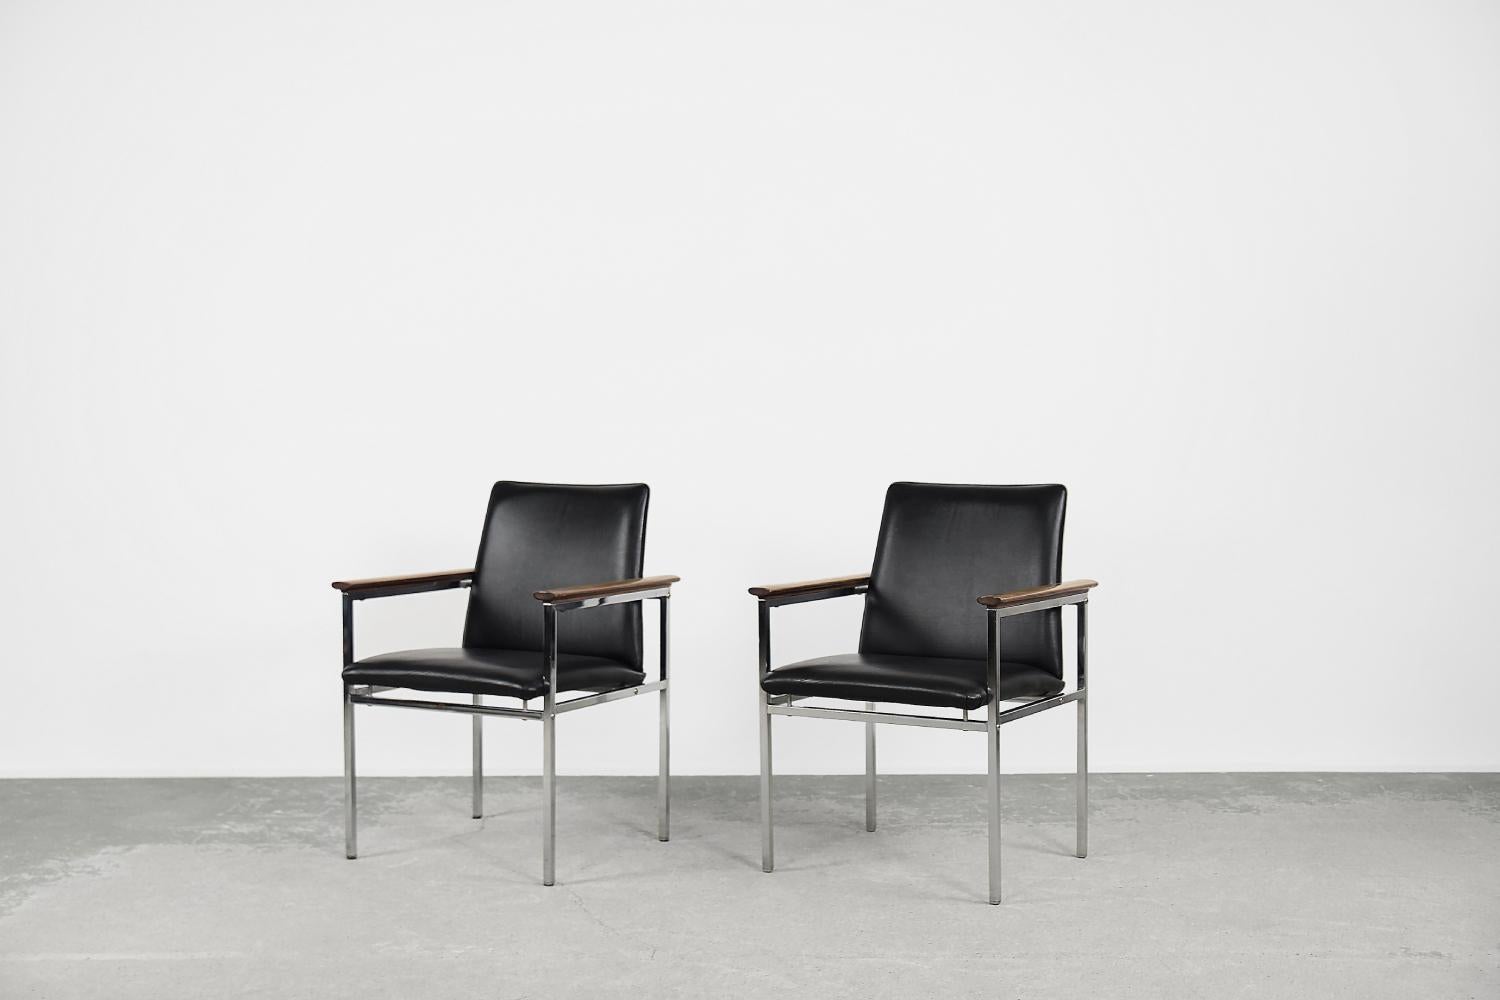 This pair of armchairs was designed by Sigvard Bernadotte for the Danish manufacturer France & Søn during the 1960s. The geometric frame of the armchairs is made of chrome-plated metal. The seat and the backrest are upholstered with black leather.